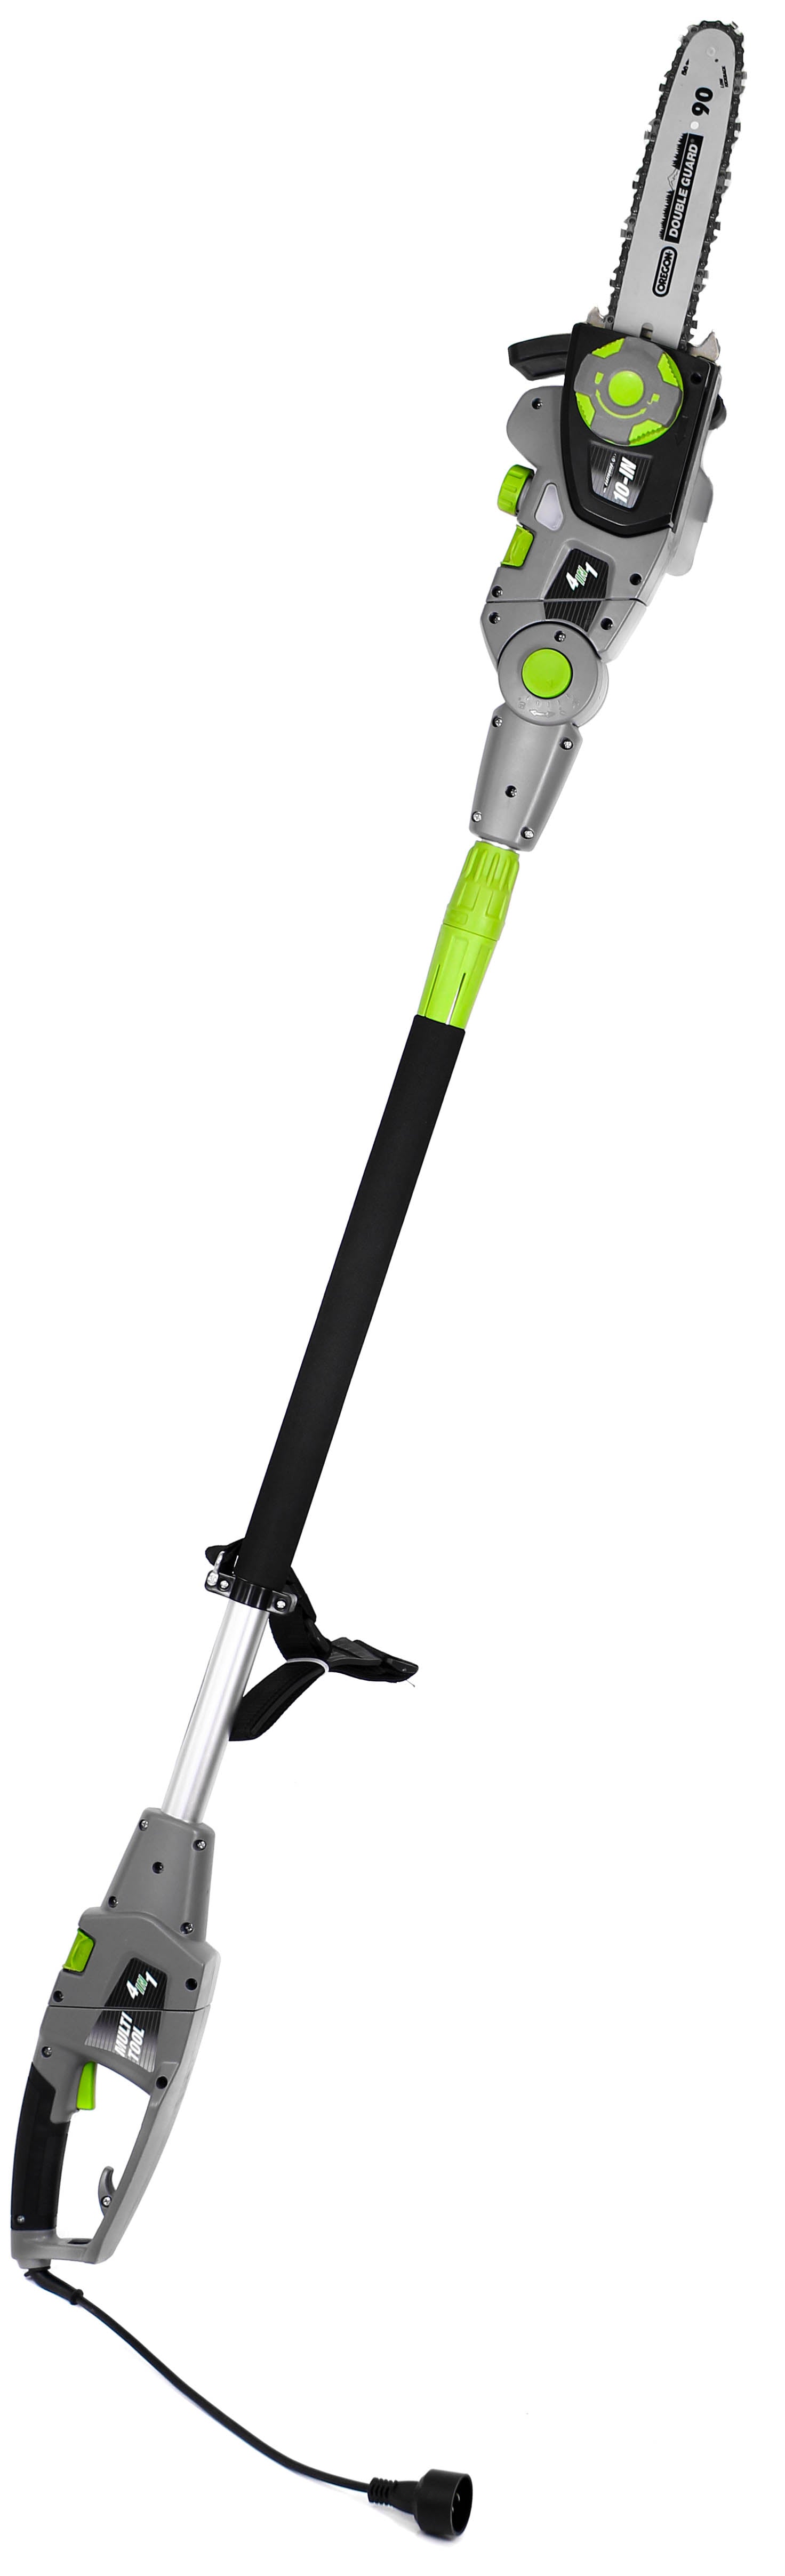 Earthwise Power Tools by ALM 120V Corded 4 in 1 Pole Saw/Hedge Trimmer